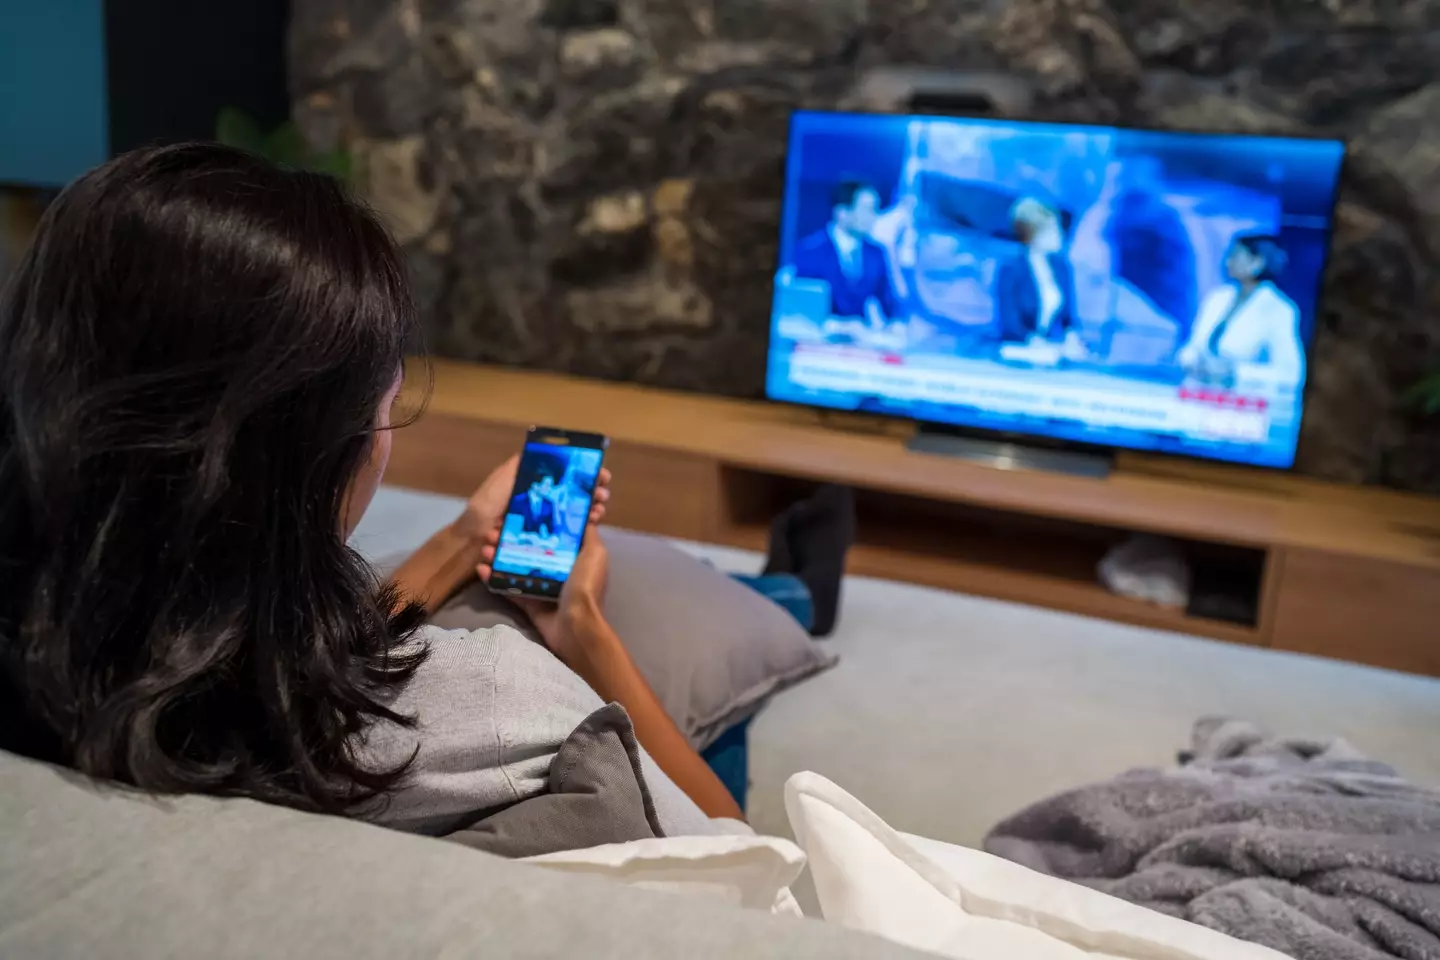 The findings from a between-subjects experiment concluded that going on social media while watching TV 'impairs emotional responses'.